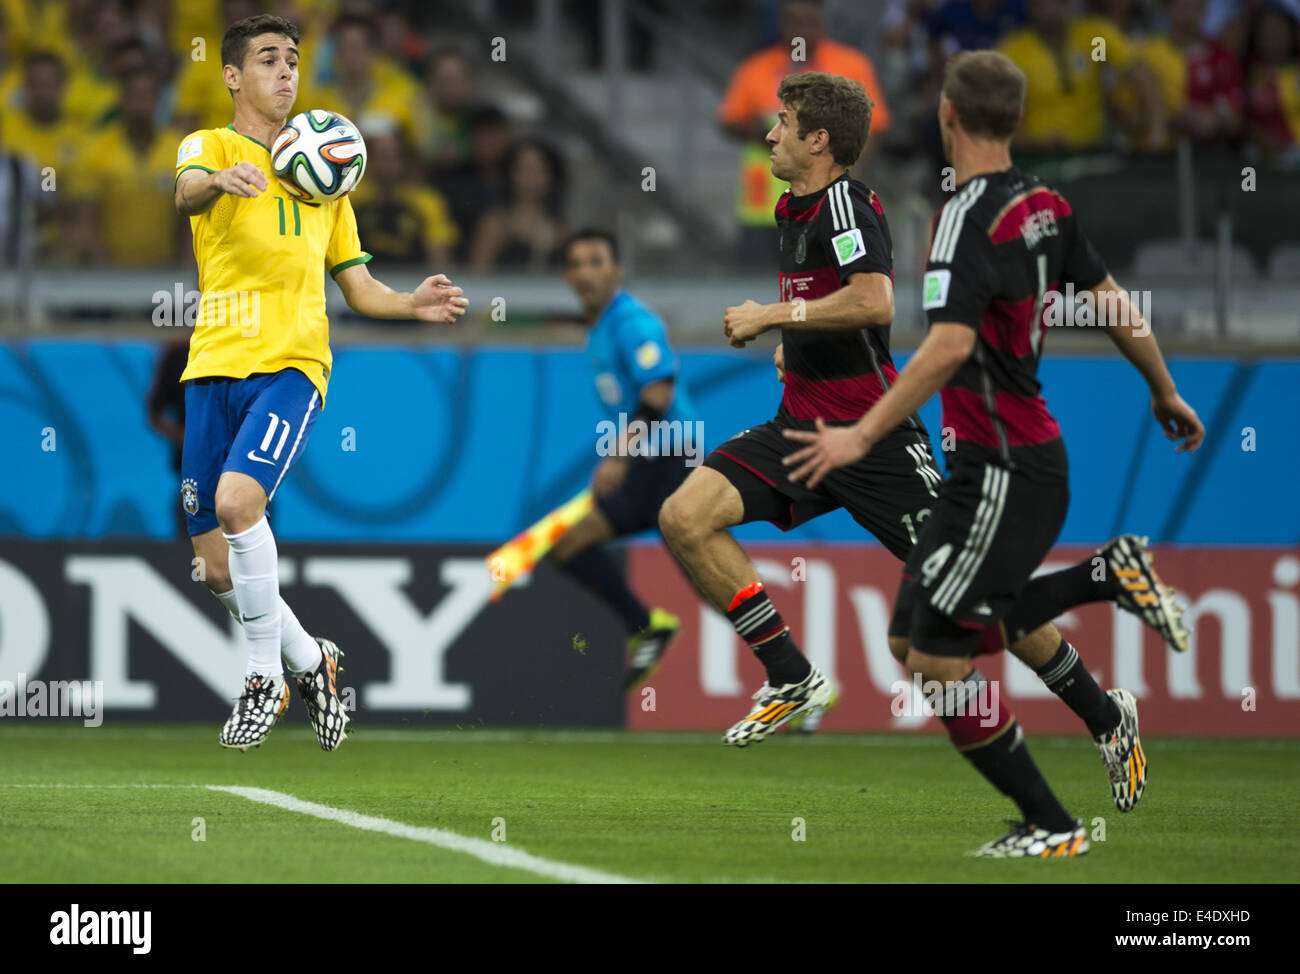 Belo Horizonte, Brazil. 8th July, 2014.  Oscar and Thomas Muller in semifinal match between Brazil and Germany, played at Mineirao stadium, 08 July 2014, correspondind to the 2014 World Cup. Photo: Urbanandsport/Nurphoto. Credit:  Urbanandsport/NurPhoto/ZUMA Wire/Alamy Live News Stock Photo